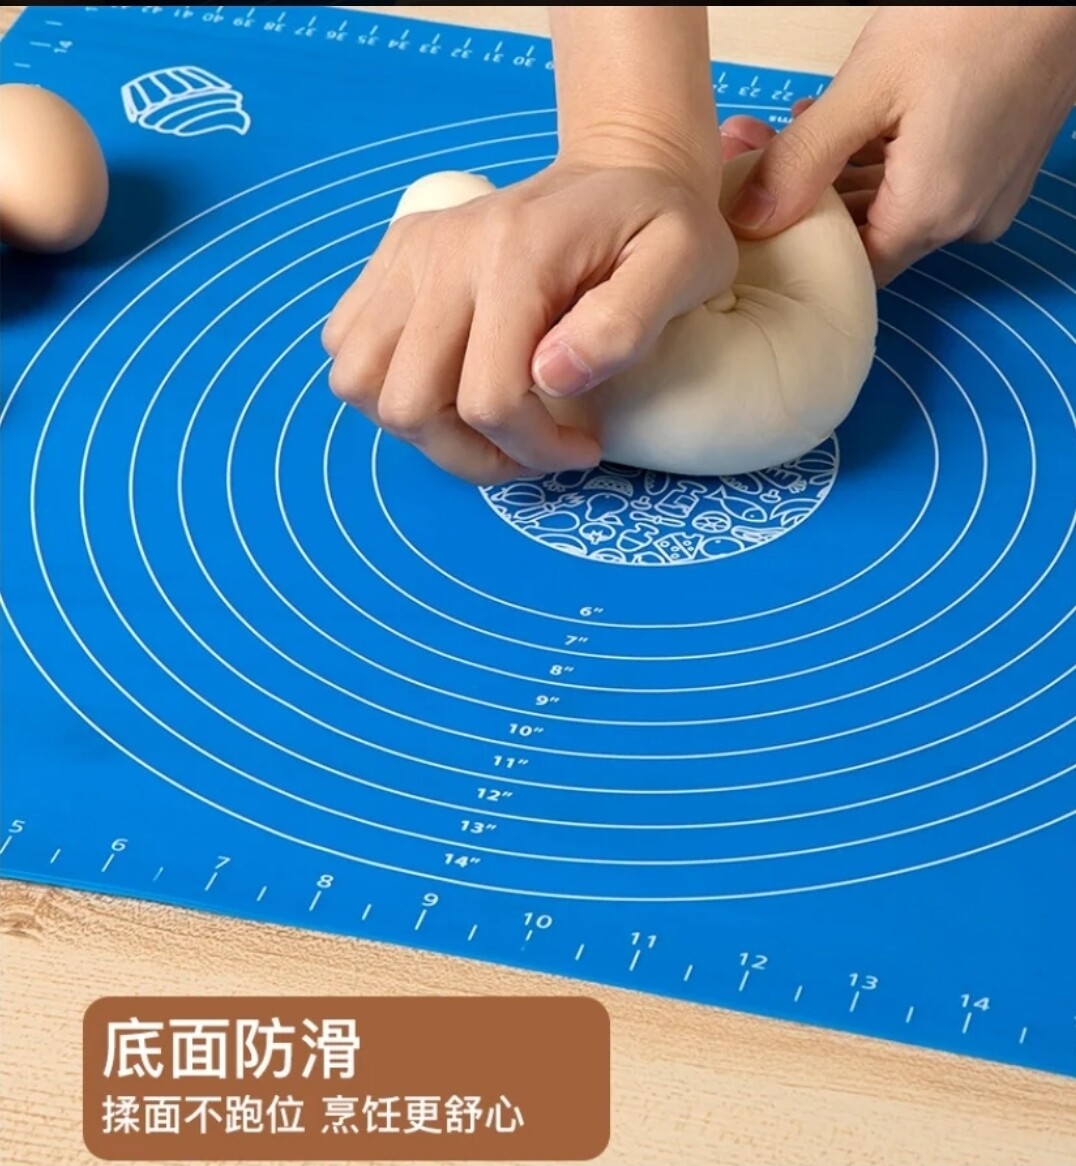 Silicon Pastry Mat for Pastry Rolling with Measurements, Thick Non Stick Baking Mat with Measurement Fondant Mat, Counter Mat, Dough Rolling Mat Silicon baking mat with baking measurements 45x35cm